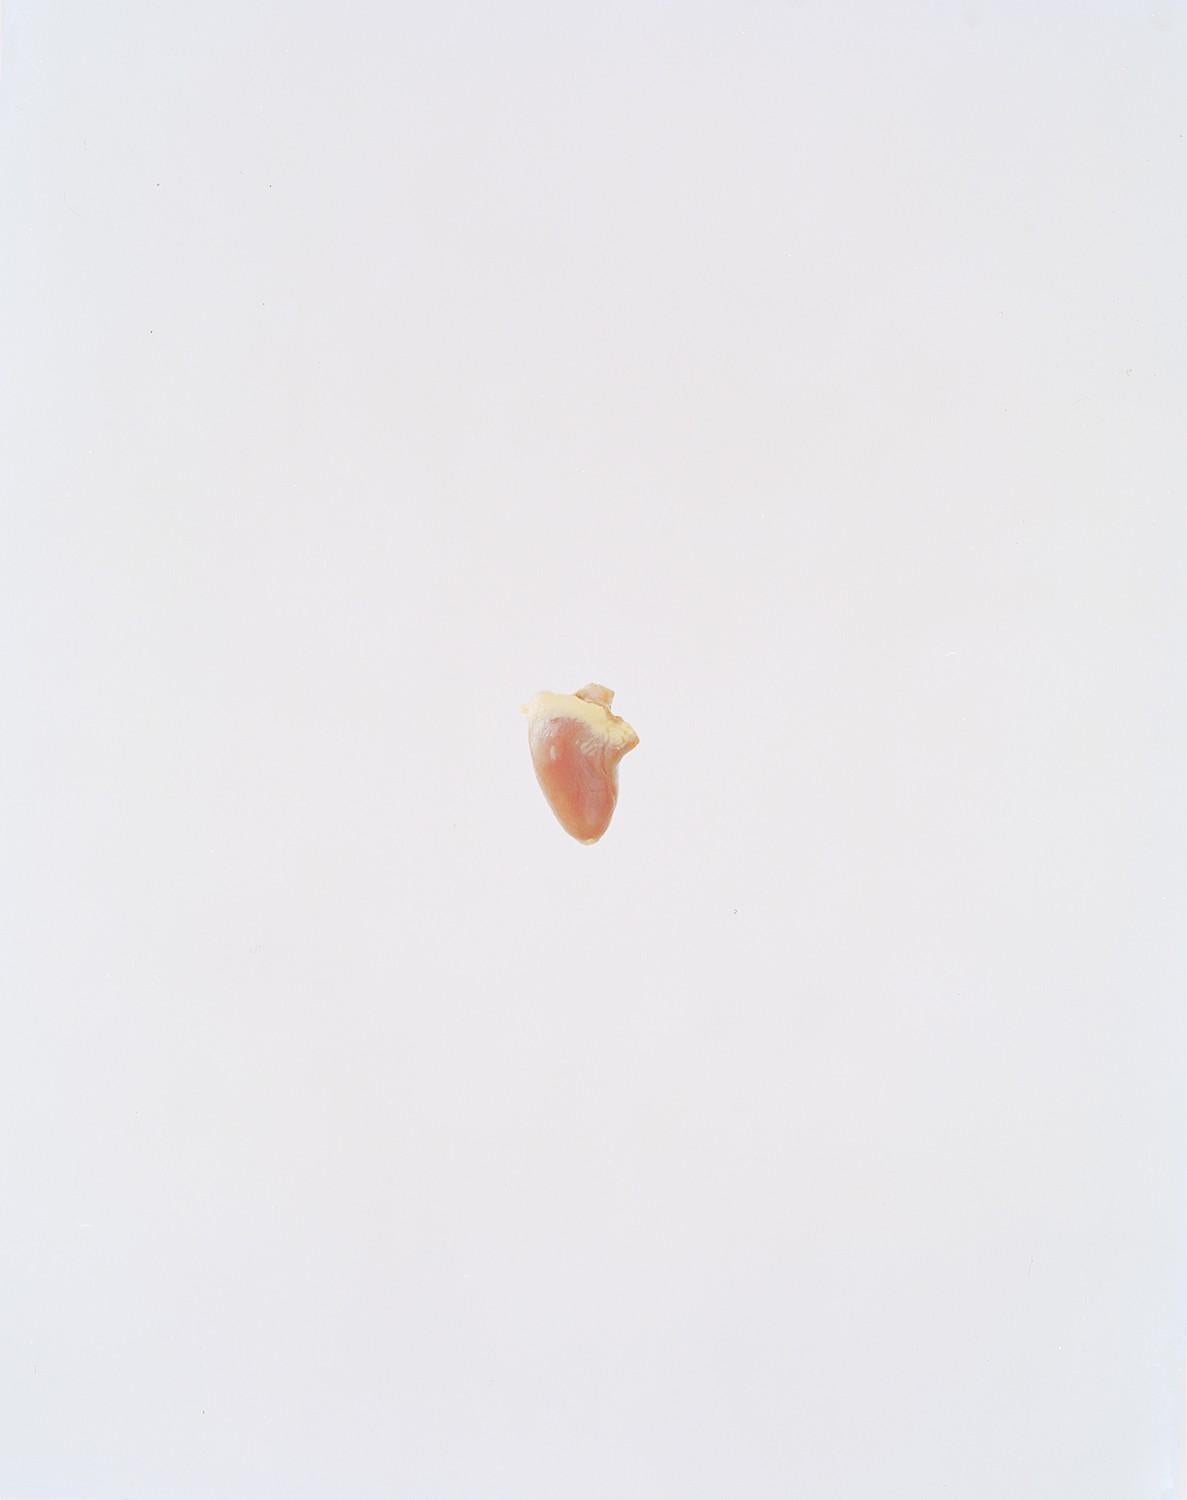 Ward documented the complexity and beauty of hearts through various species. Conceptually this untitled series shines a light on diversity, individuality, mortality, and relationships while alluding to his personal relationship with heart failure.